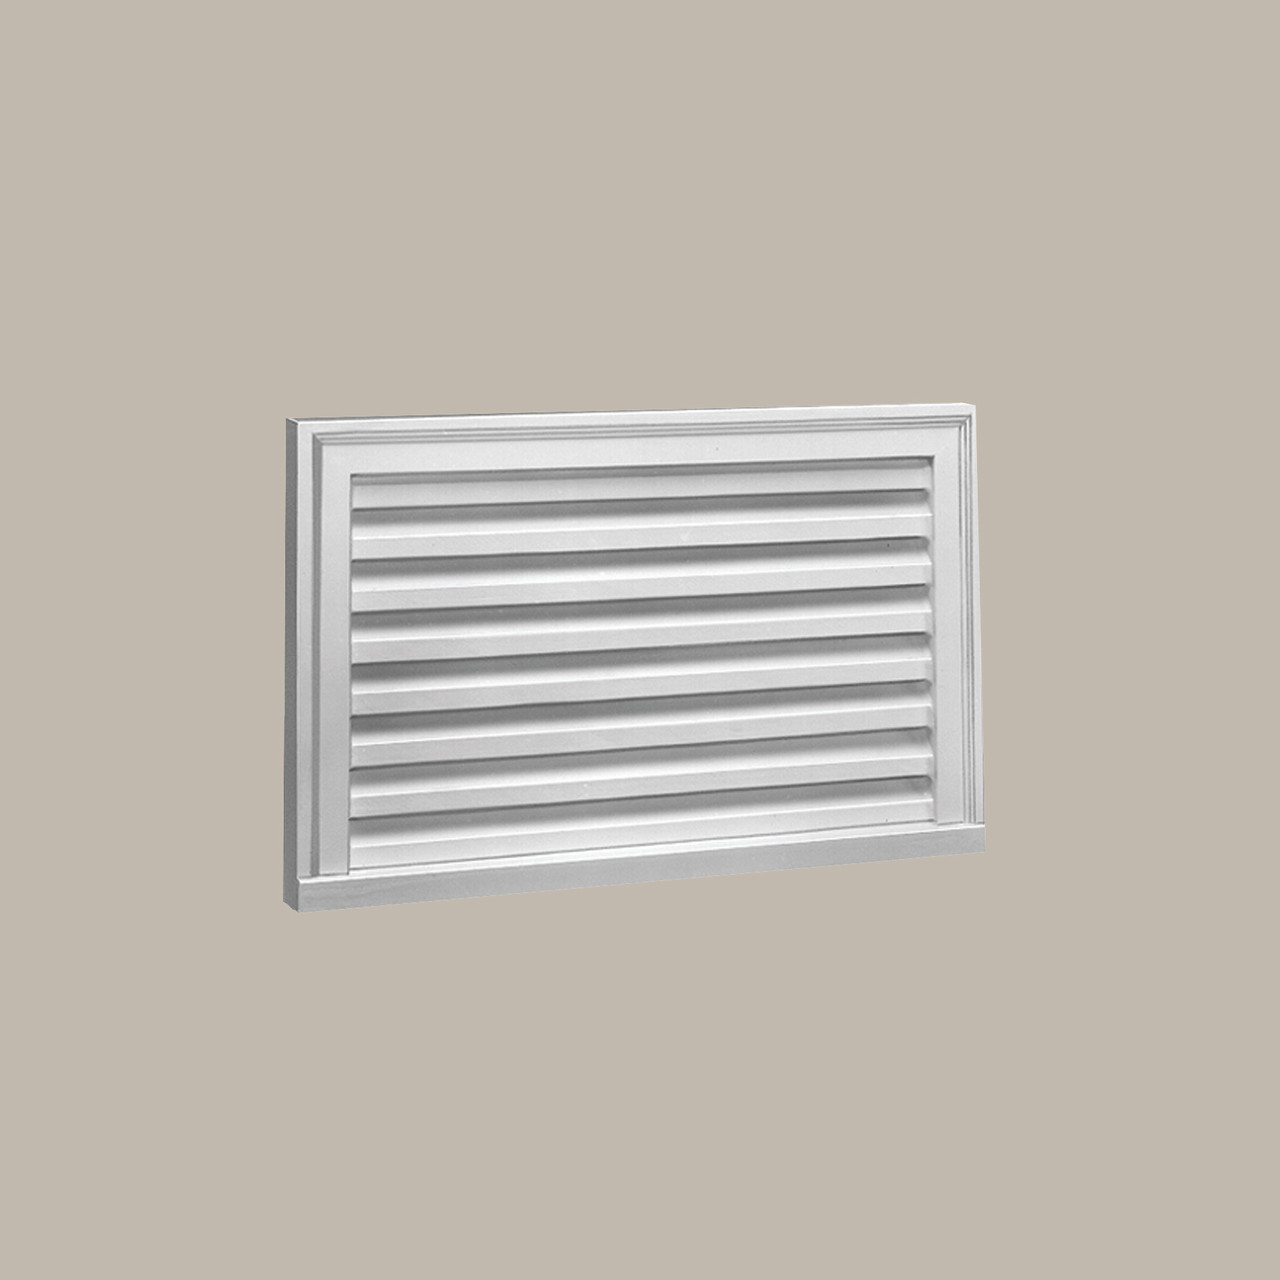 FLV32X16 Fypon Functional Horizontal Rectangle Louver Vent